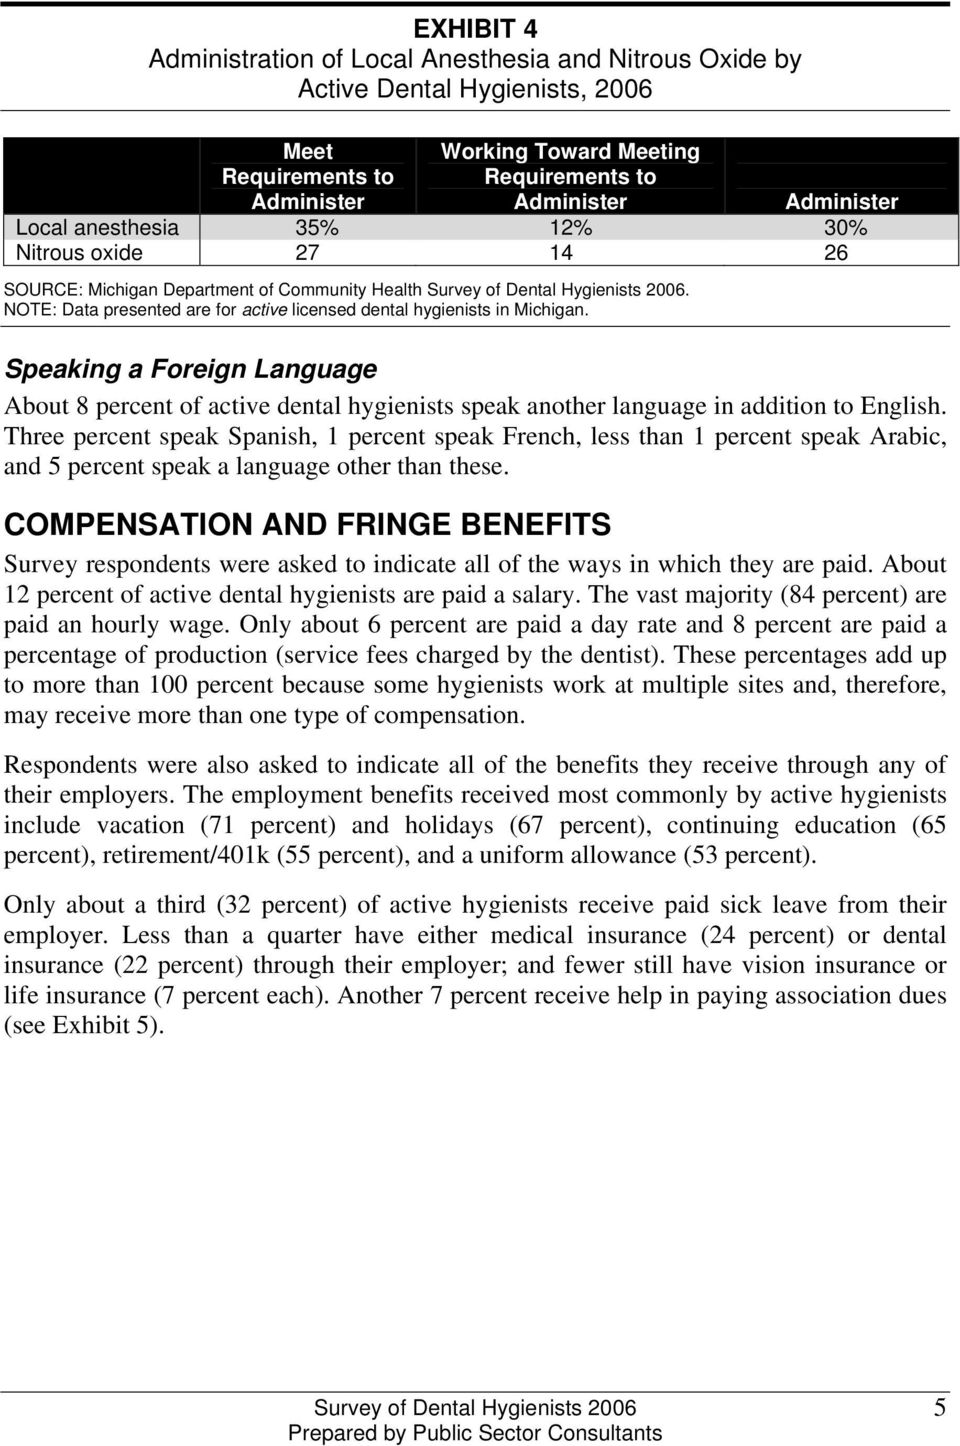 Speaking a Foreign Language About 8 percent of active dental hygienists speak another language in addition to English.